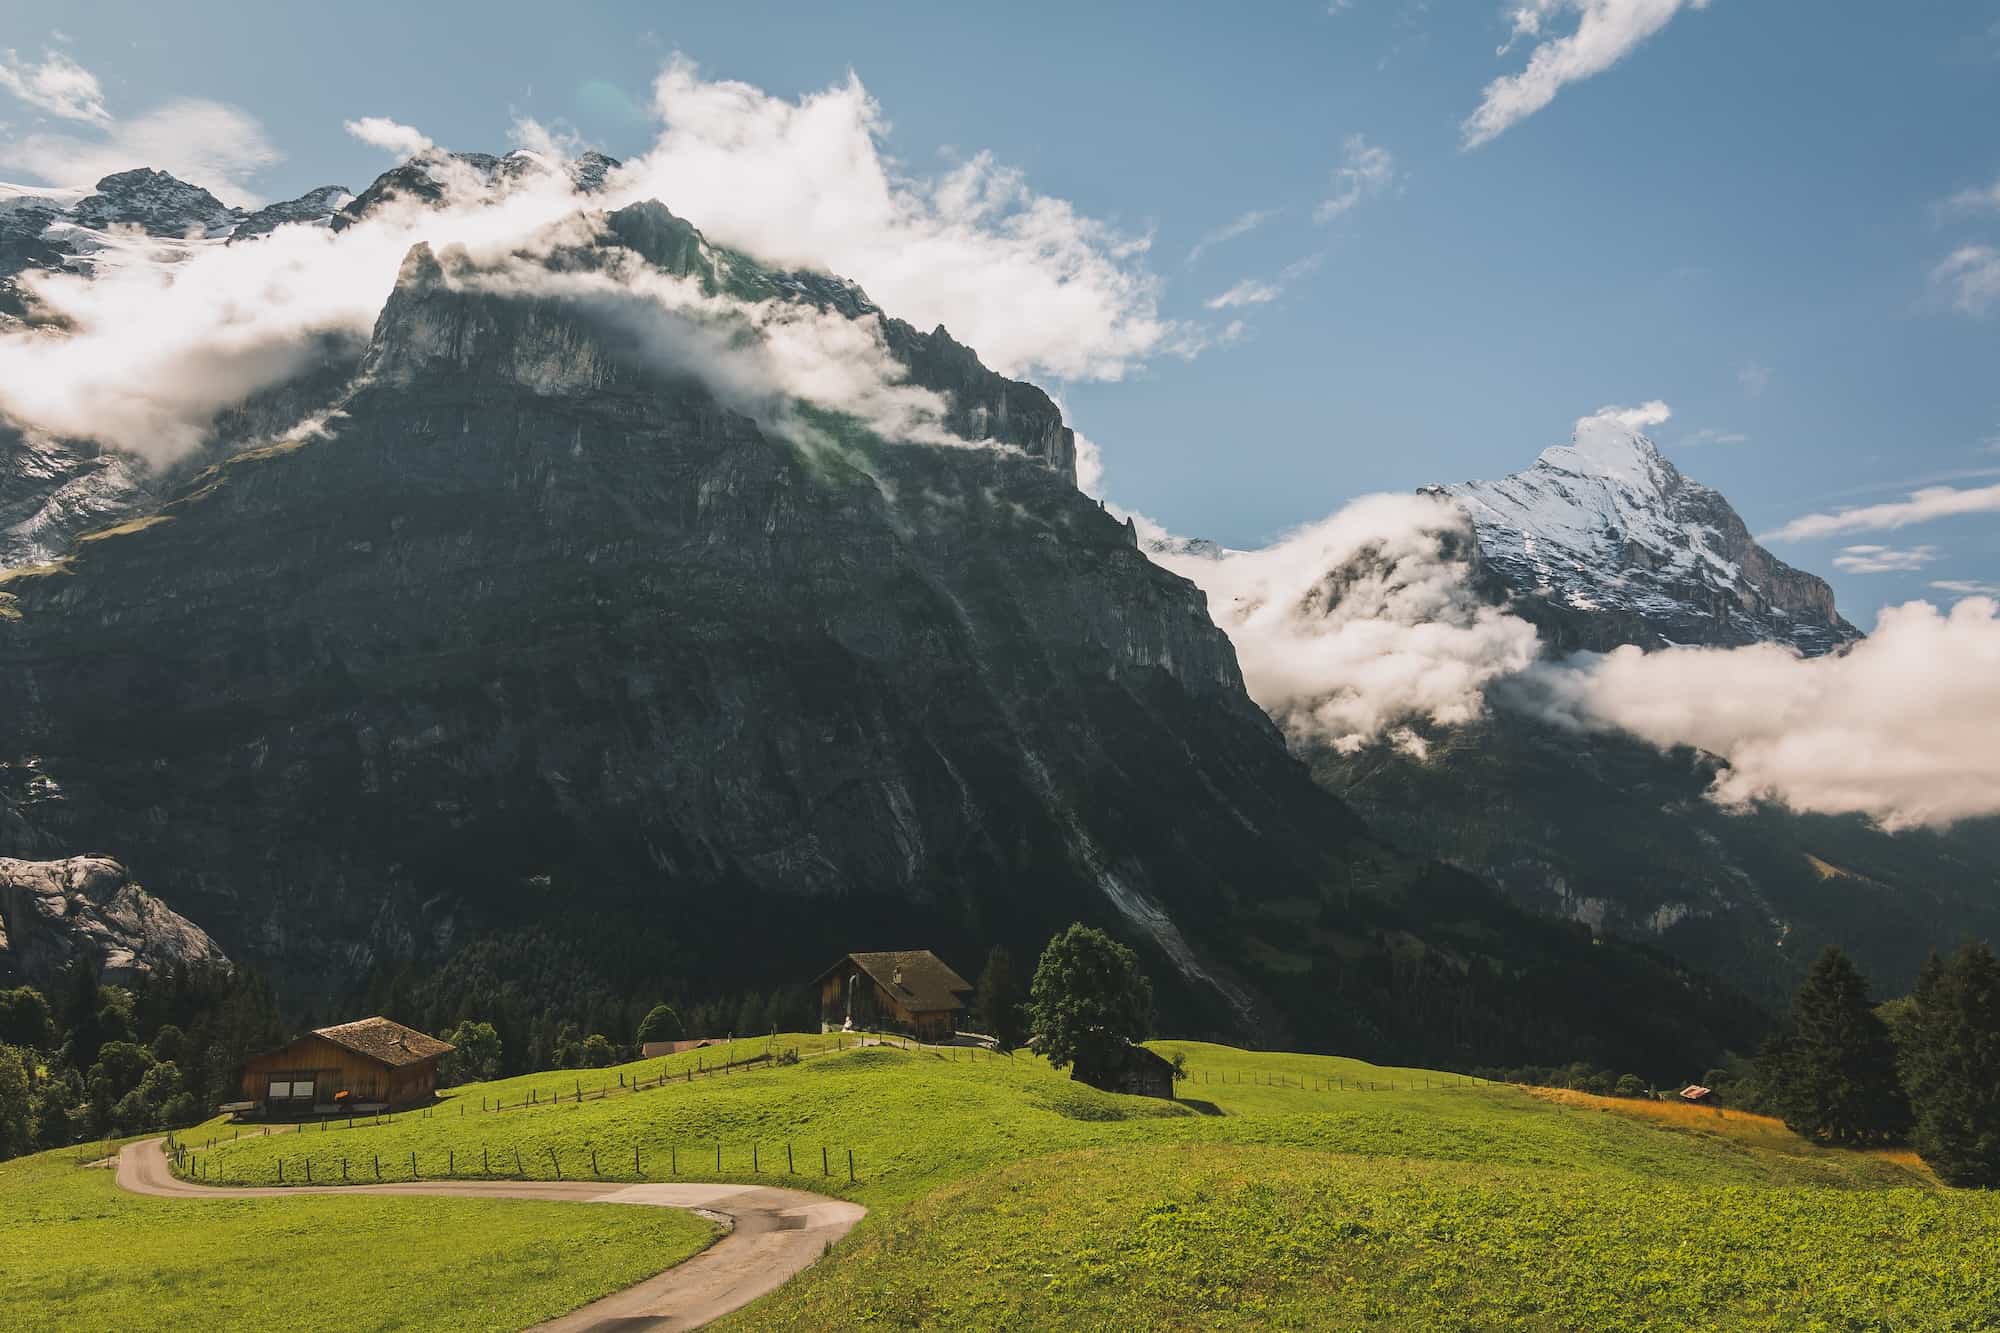 Chasing the Sun | Driving to Grindelwald + Those Gorgeous Swiss Alps